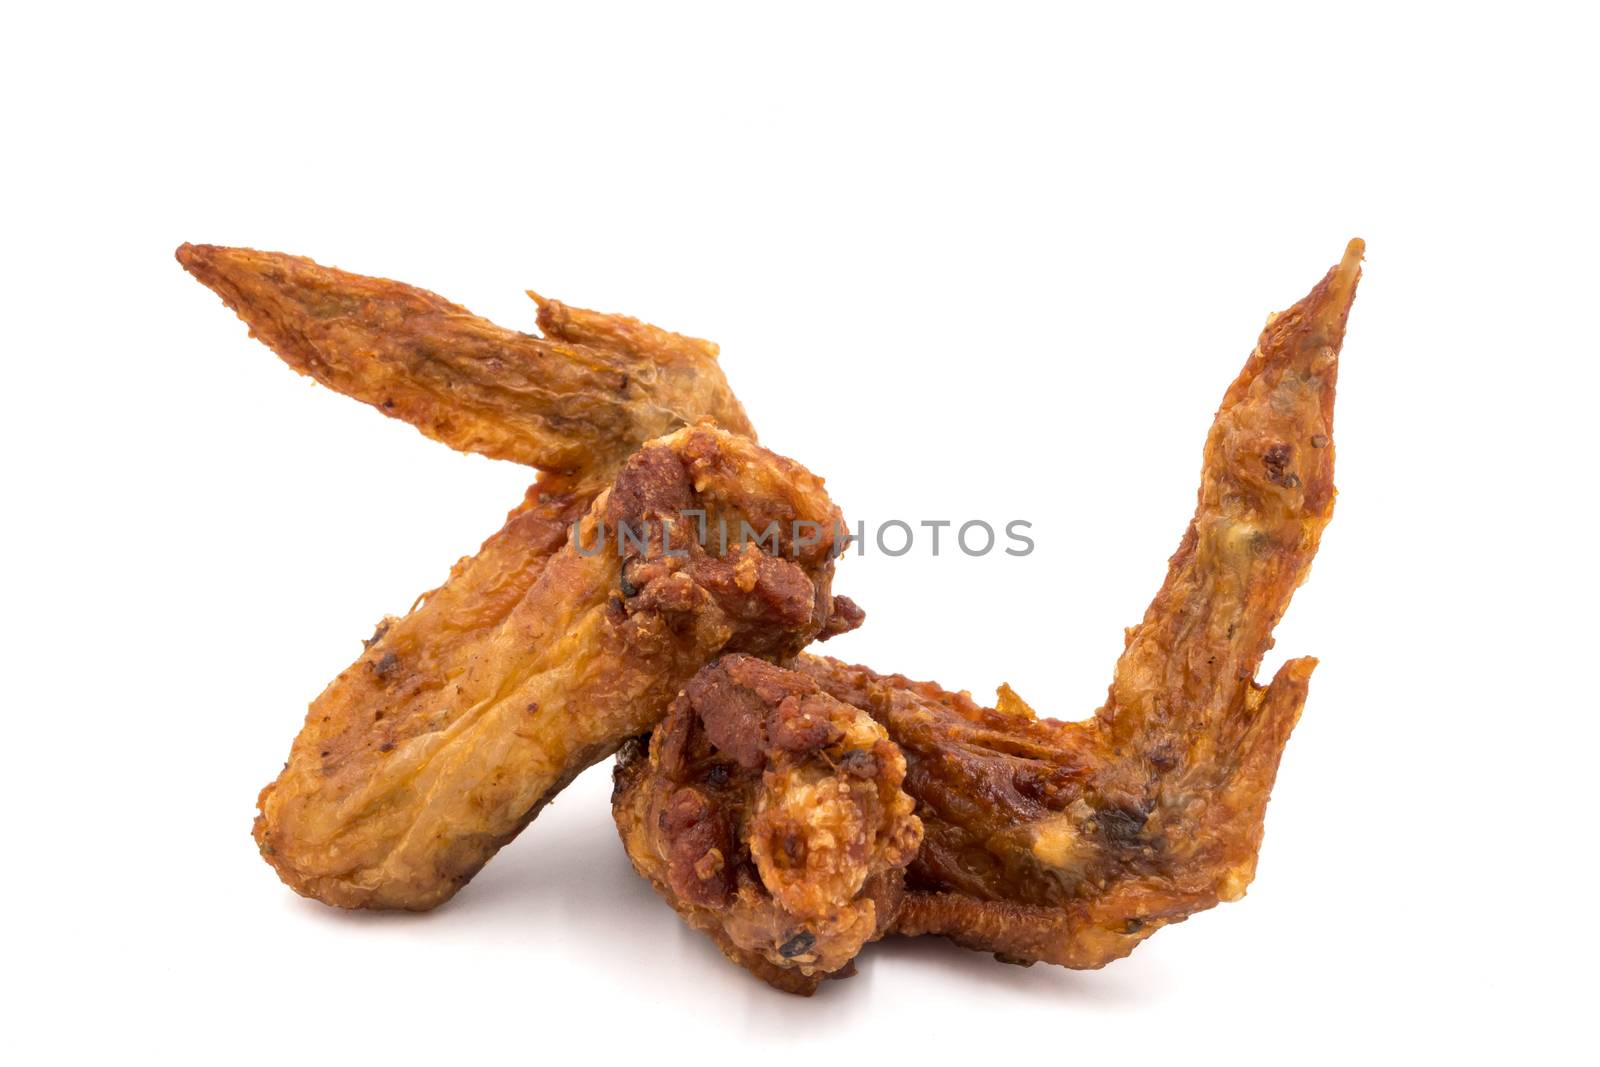 Fried chicken wings on a white background. by ronnarong